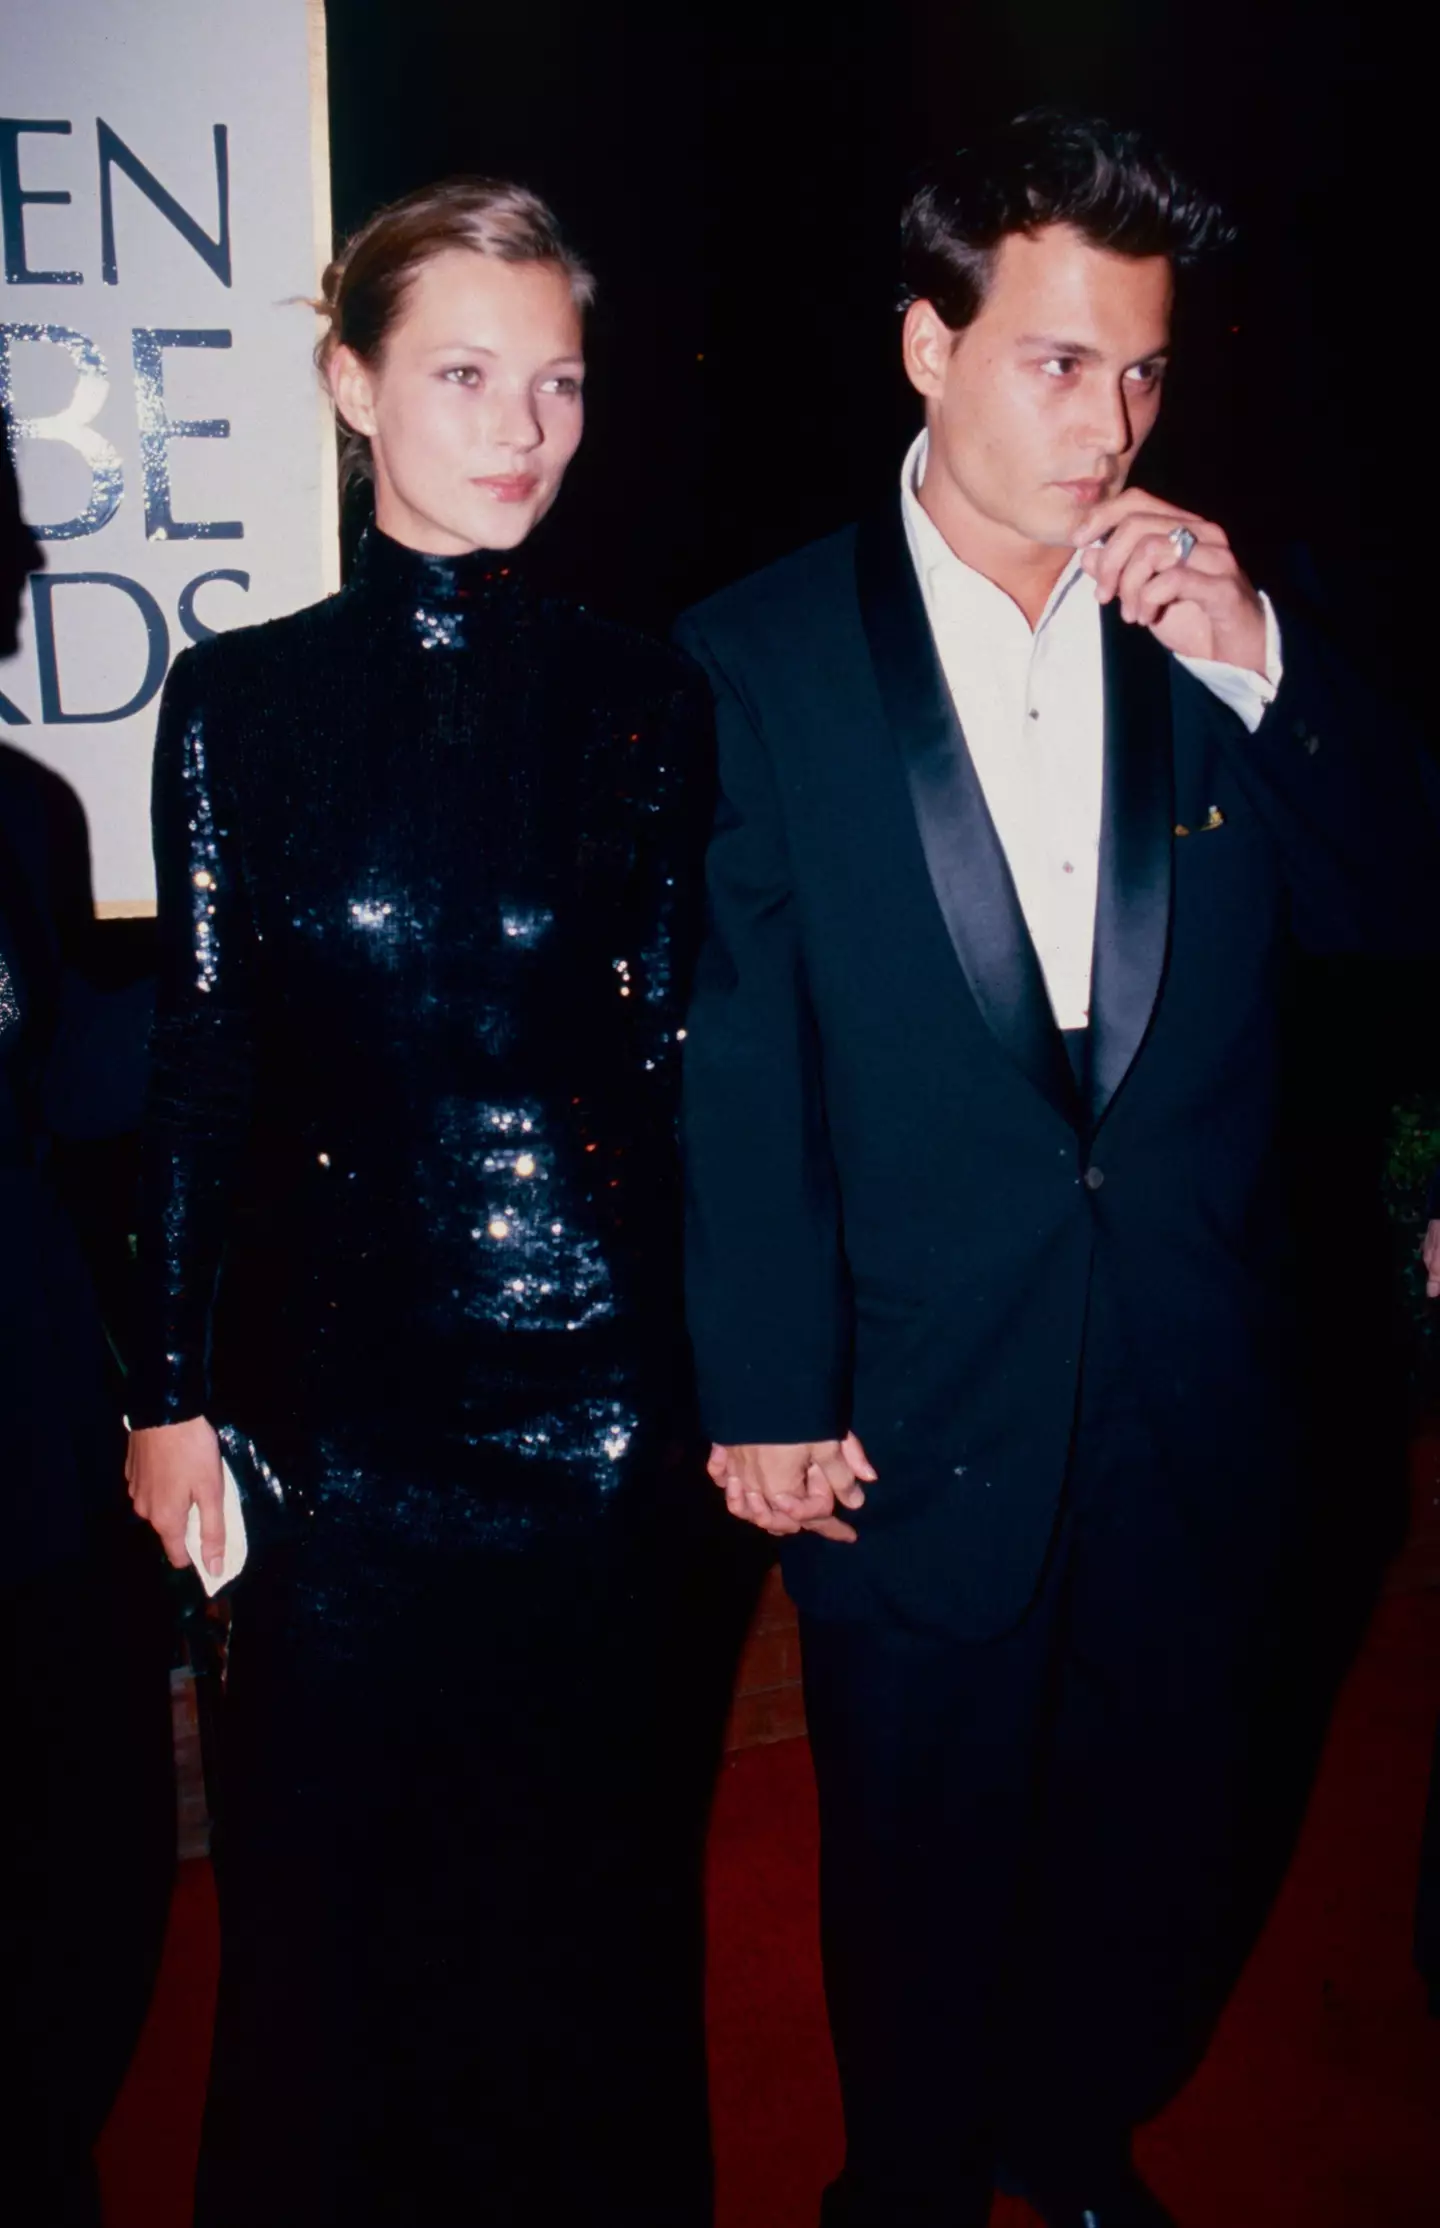 Moss and Depp in 1995.